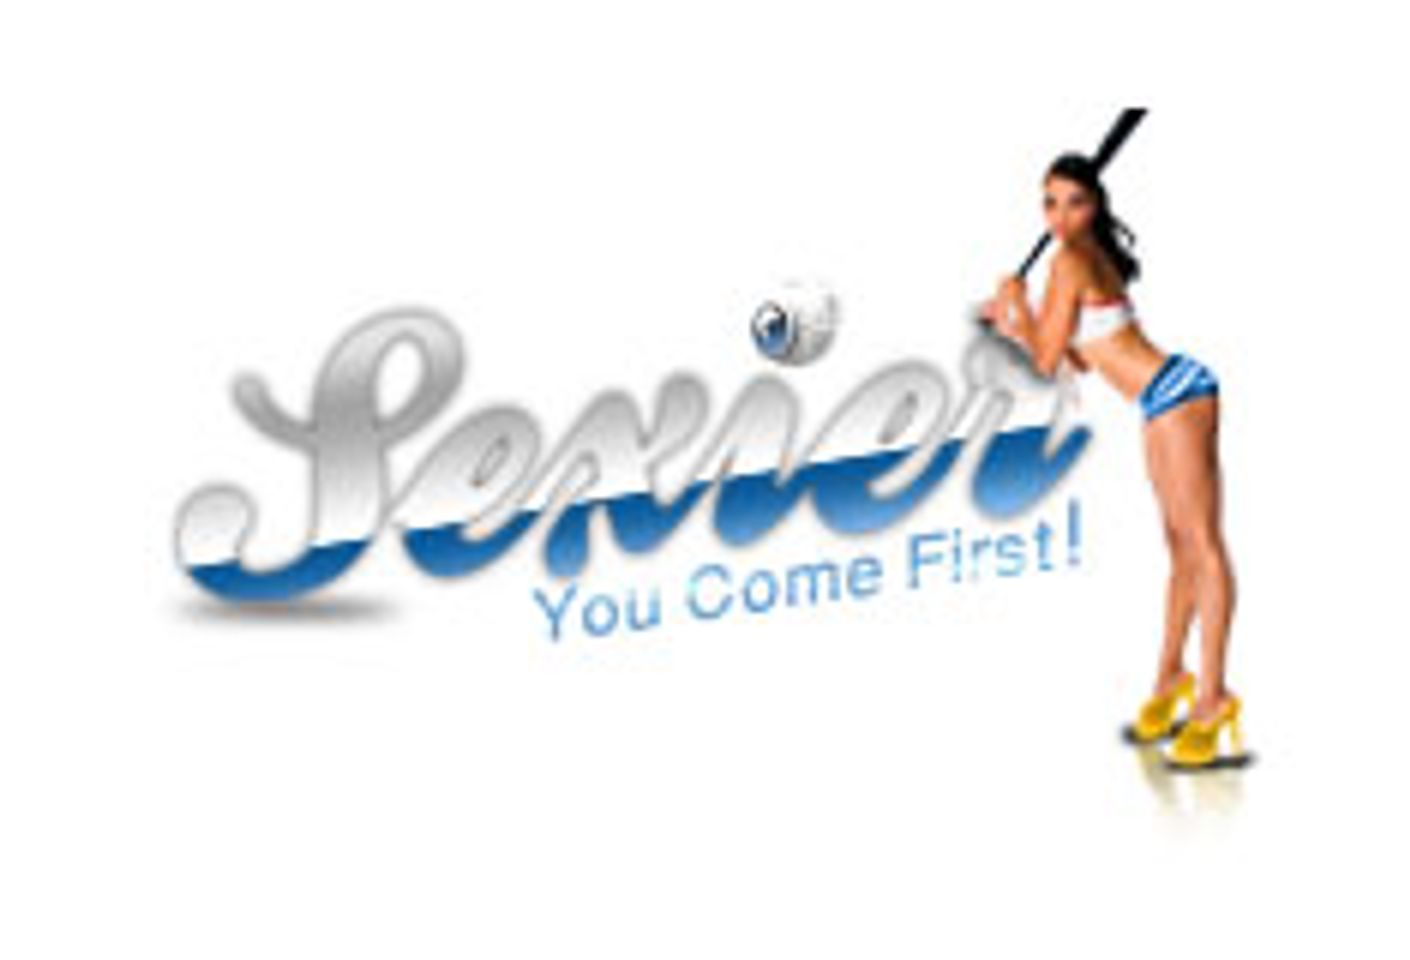 Sexier.com Affiliates Break Records, Get More $125 Payouts in Sept.